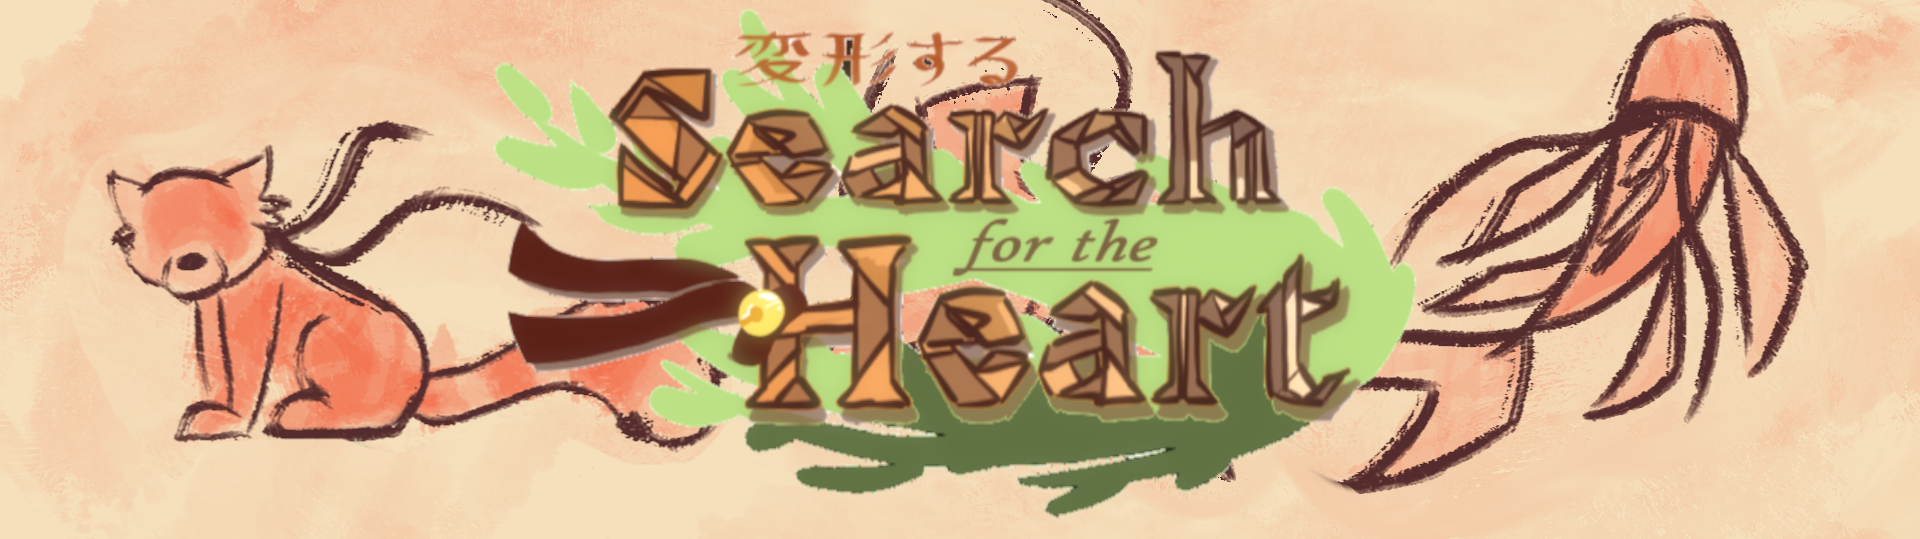 Search for the Heart